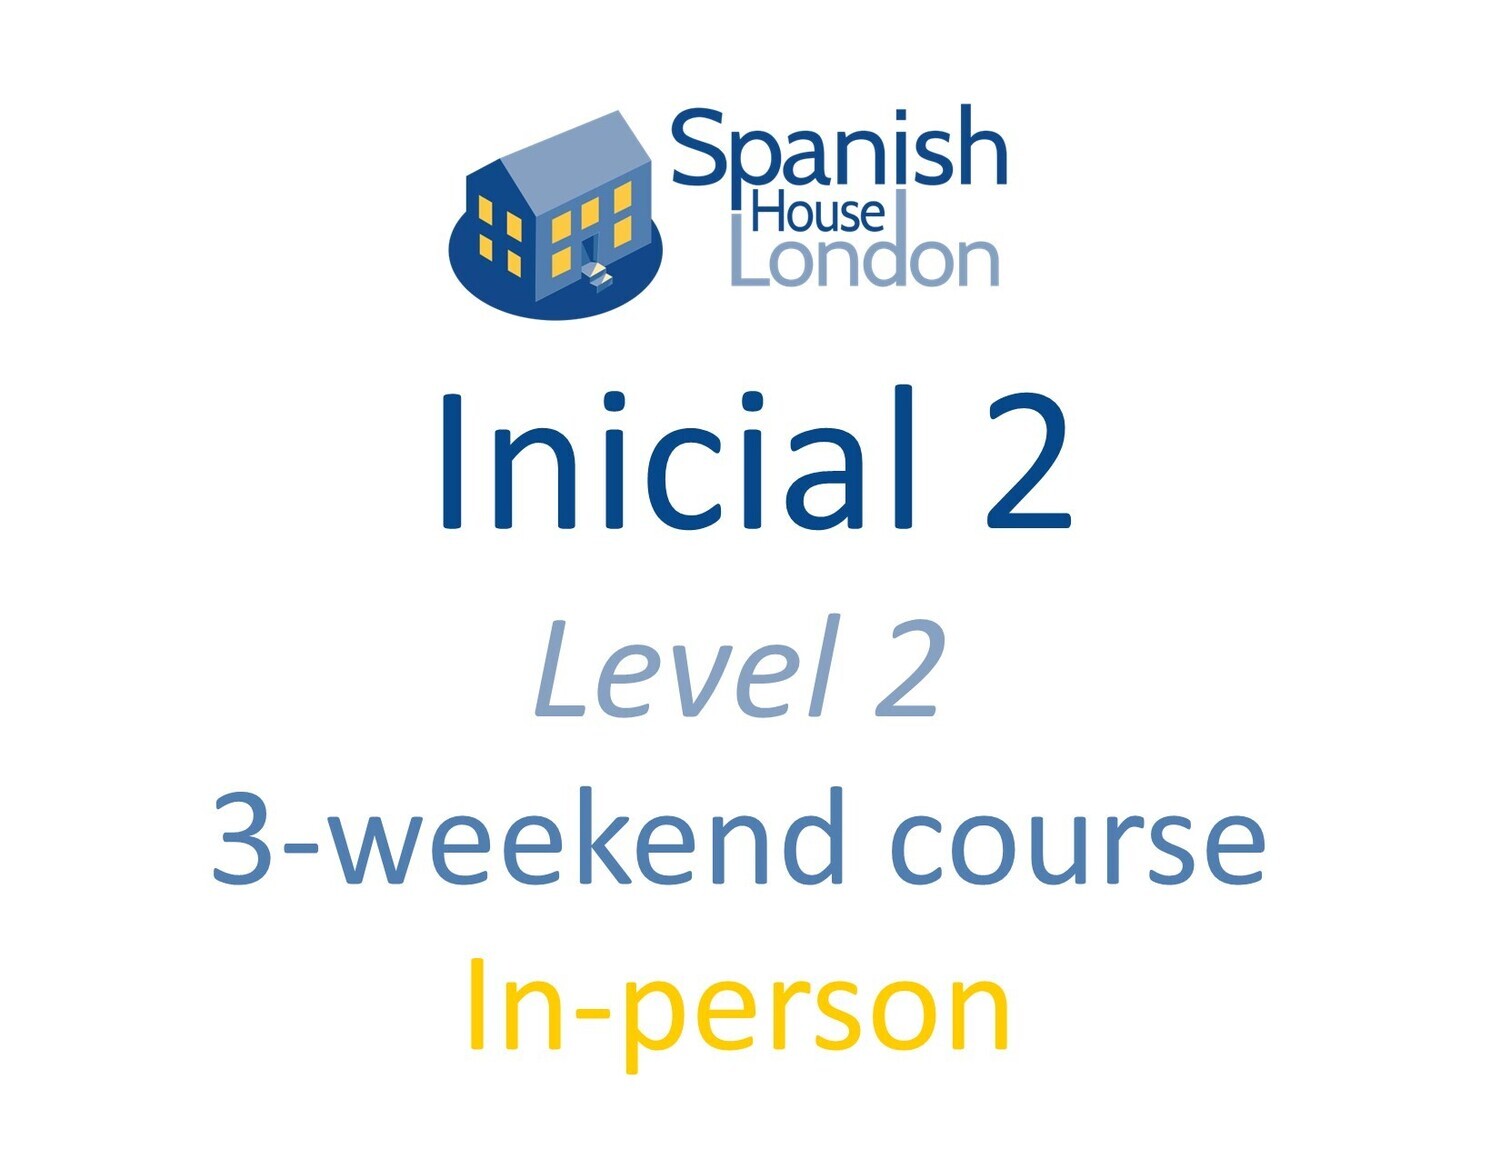 Weekend-Intensive Inicial 2 Course starting on 6th October at 7pm in Clapham North